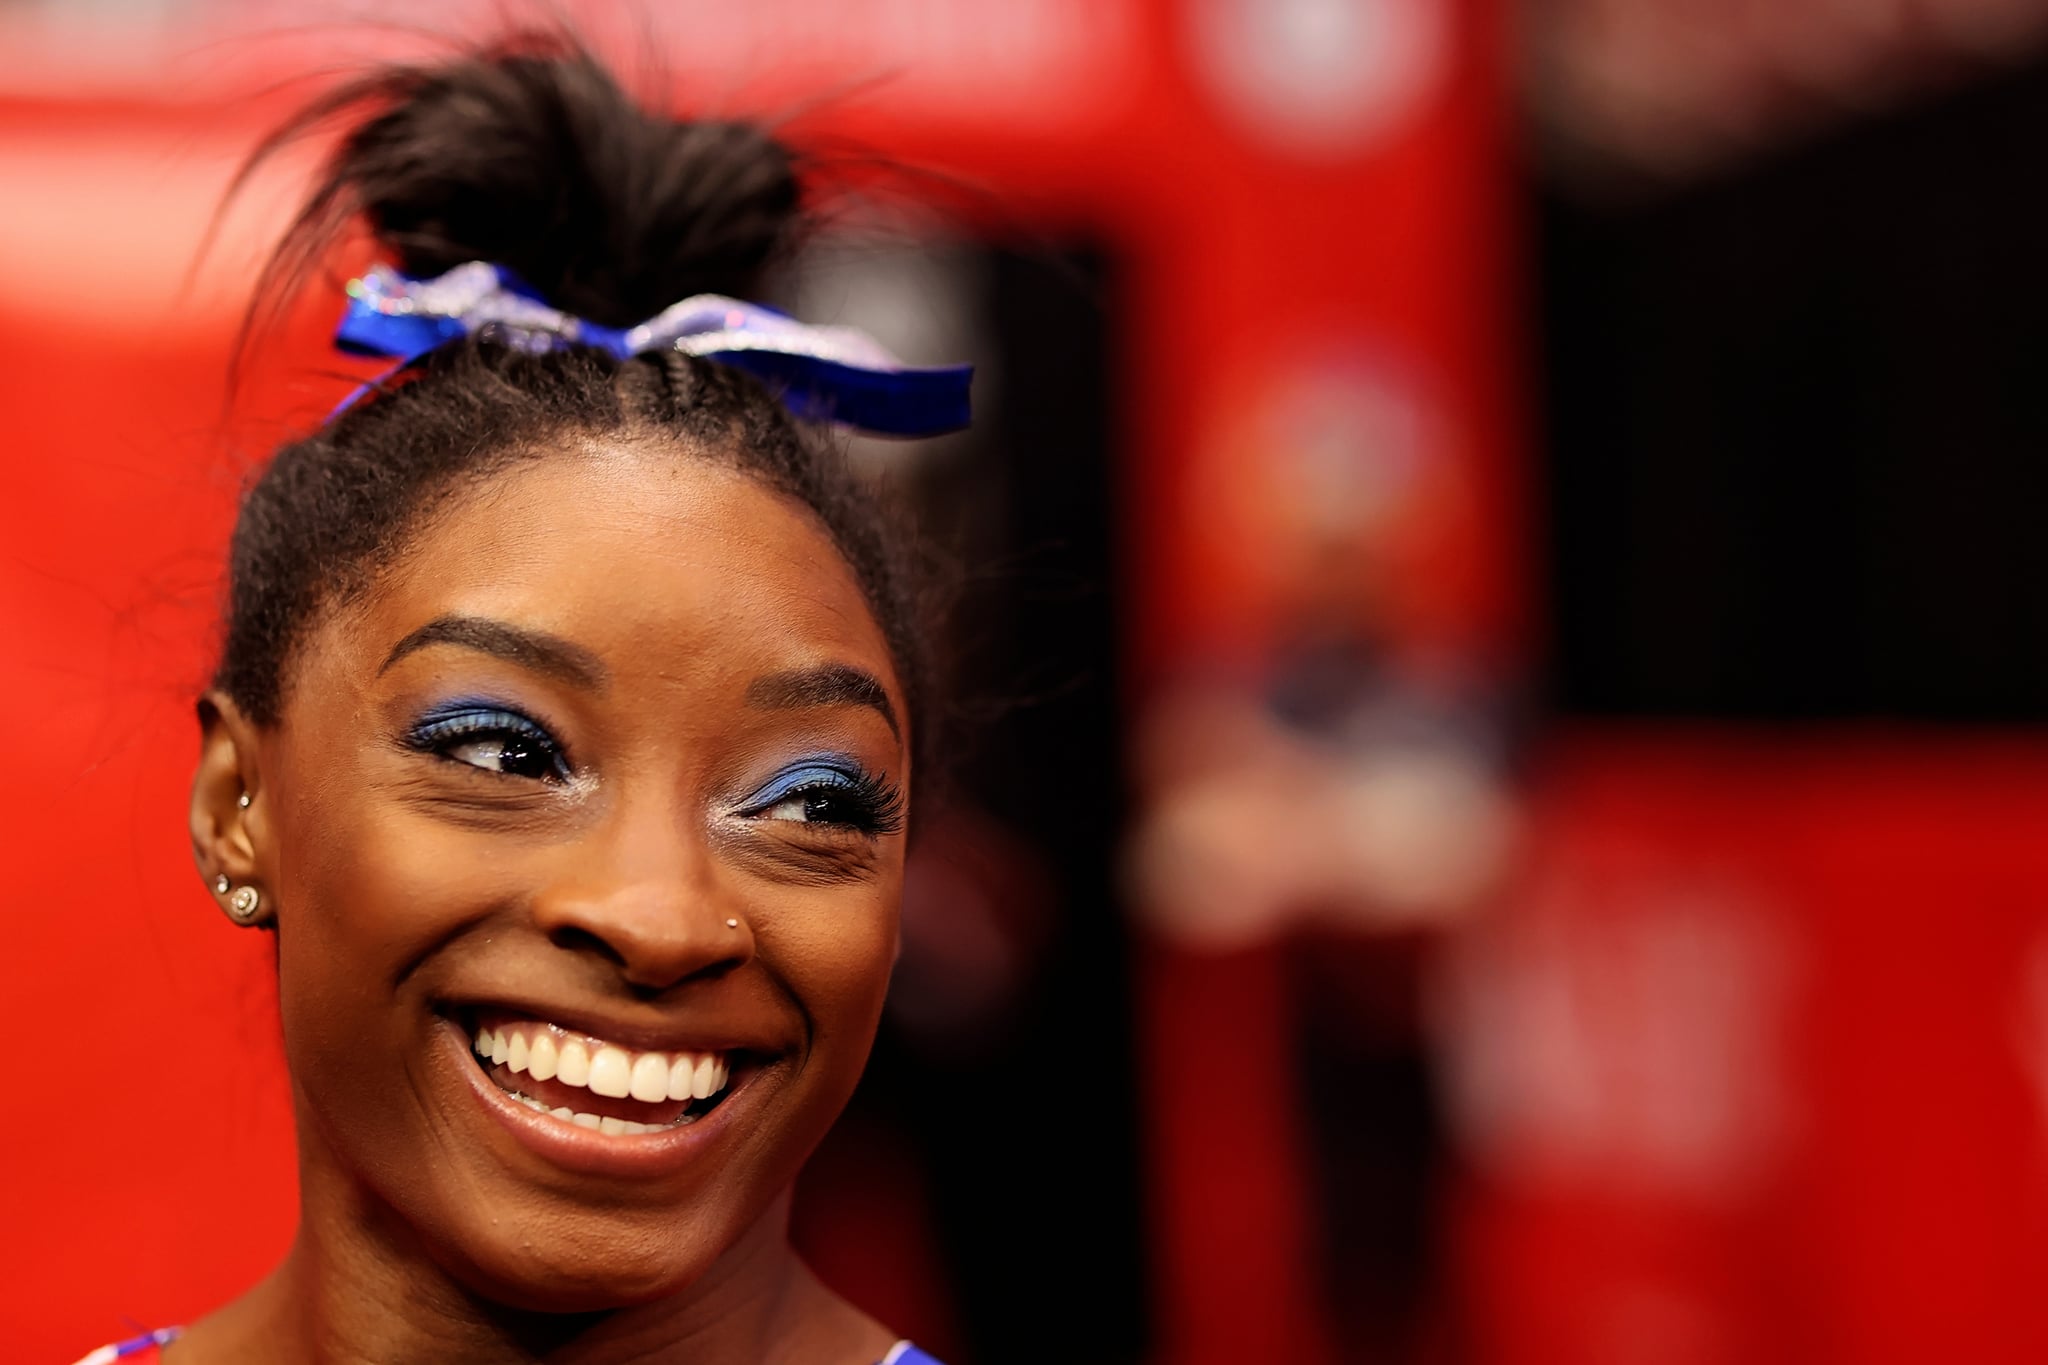 ST LOUIS, MISSOURI - JUNE 25: Simone Biles warms up prior to competition on day 2 of the women's 2021 U.S. Olympic Trials - Gymnastics at America's Centre on June 25, 2021 in St Louis, Missouri. (Photo by Carmen Mandato/Getty Images)